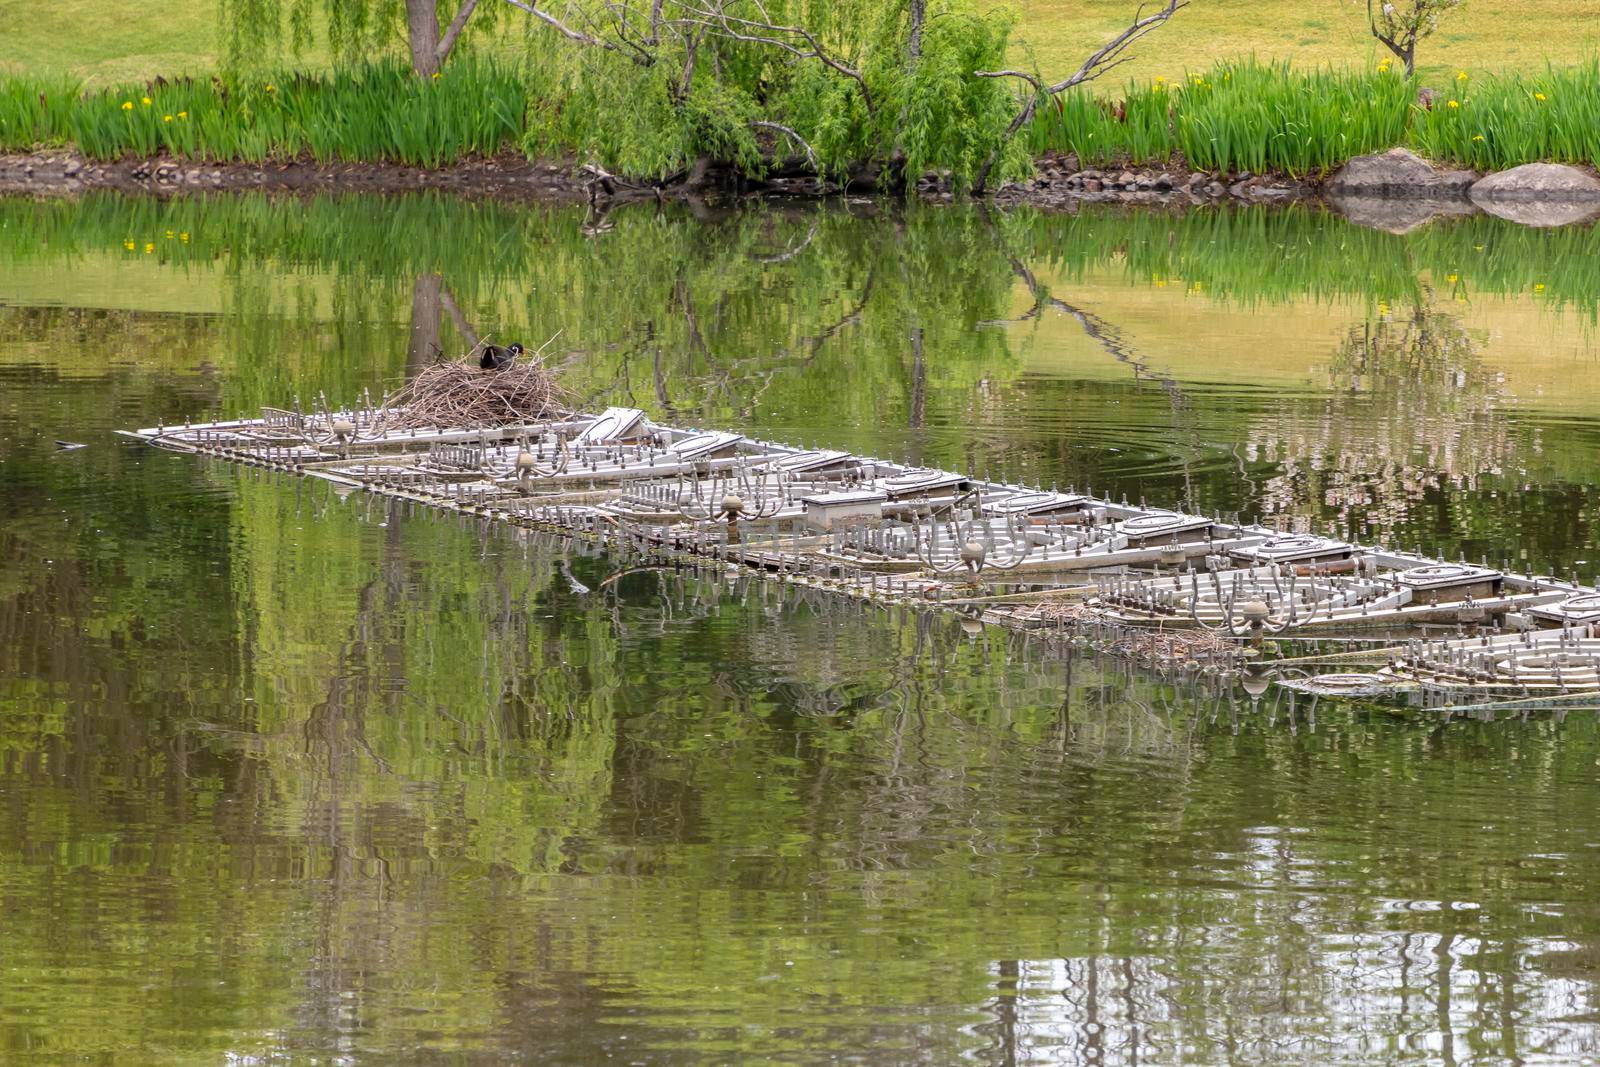 A waterfowl nesting on a portable fireworks pontoon floating on a lake in a large public garden